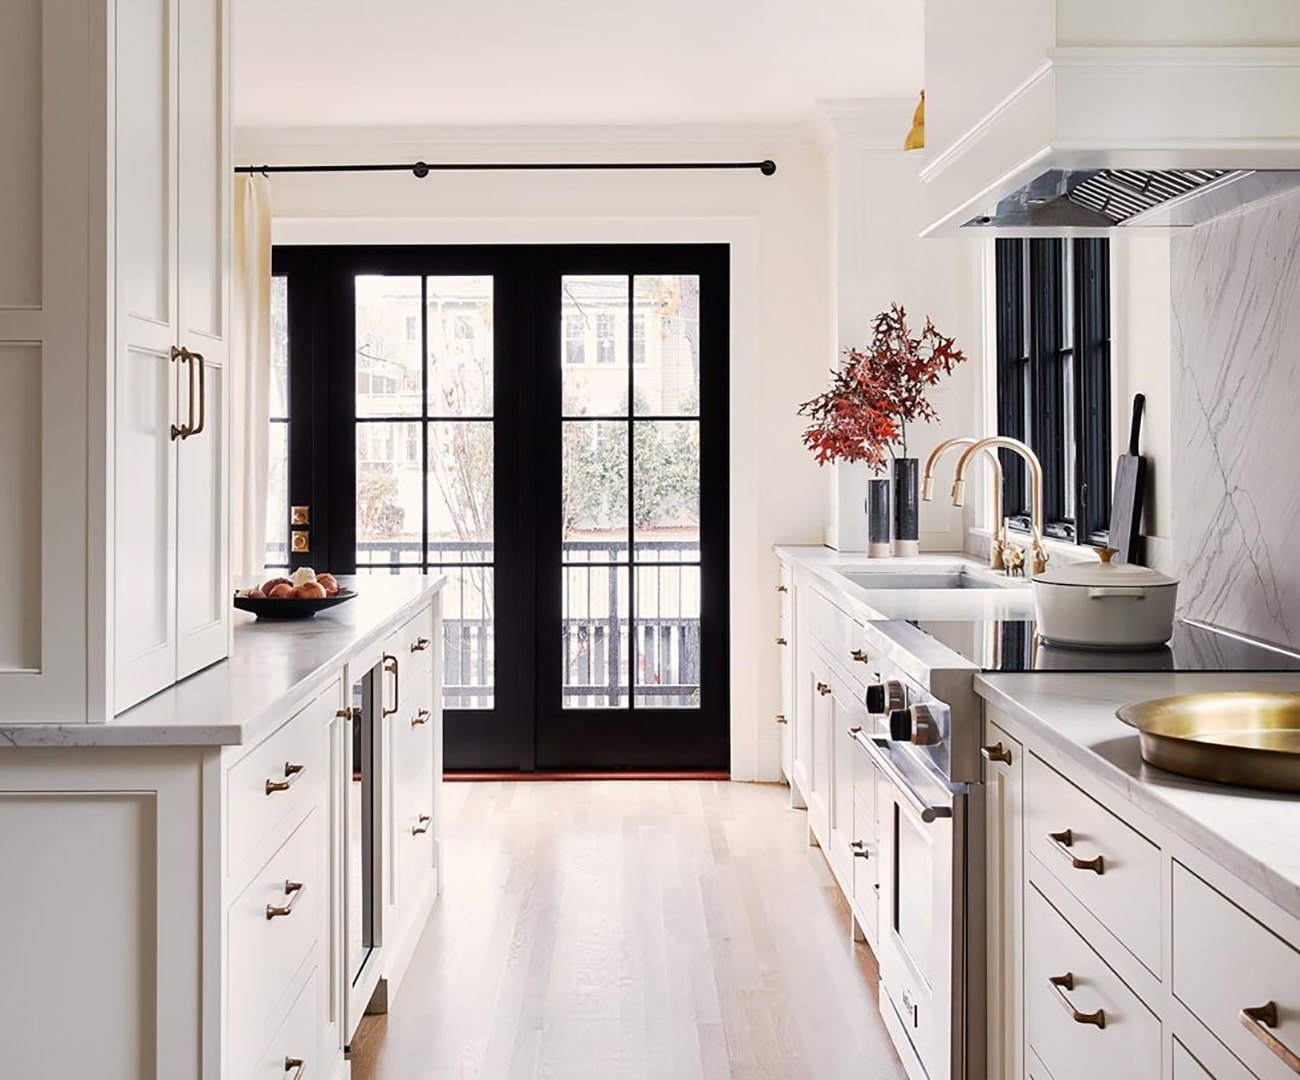 A white narrow kitchen has black hinged french patio doors on the far wall.